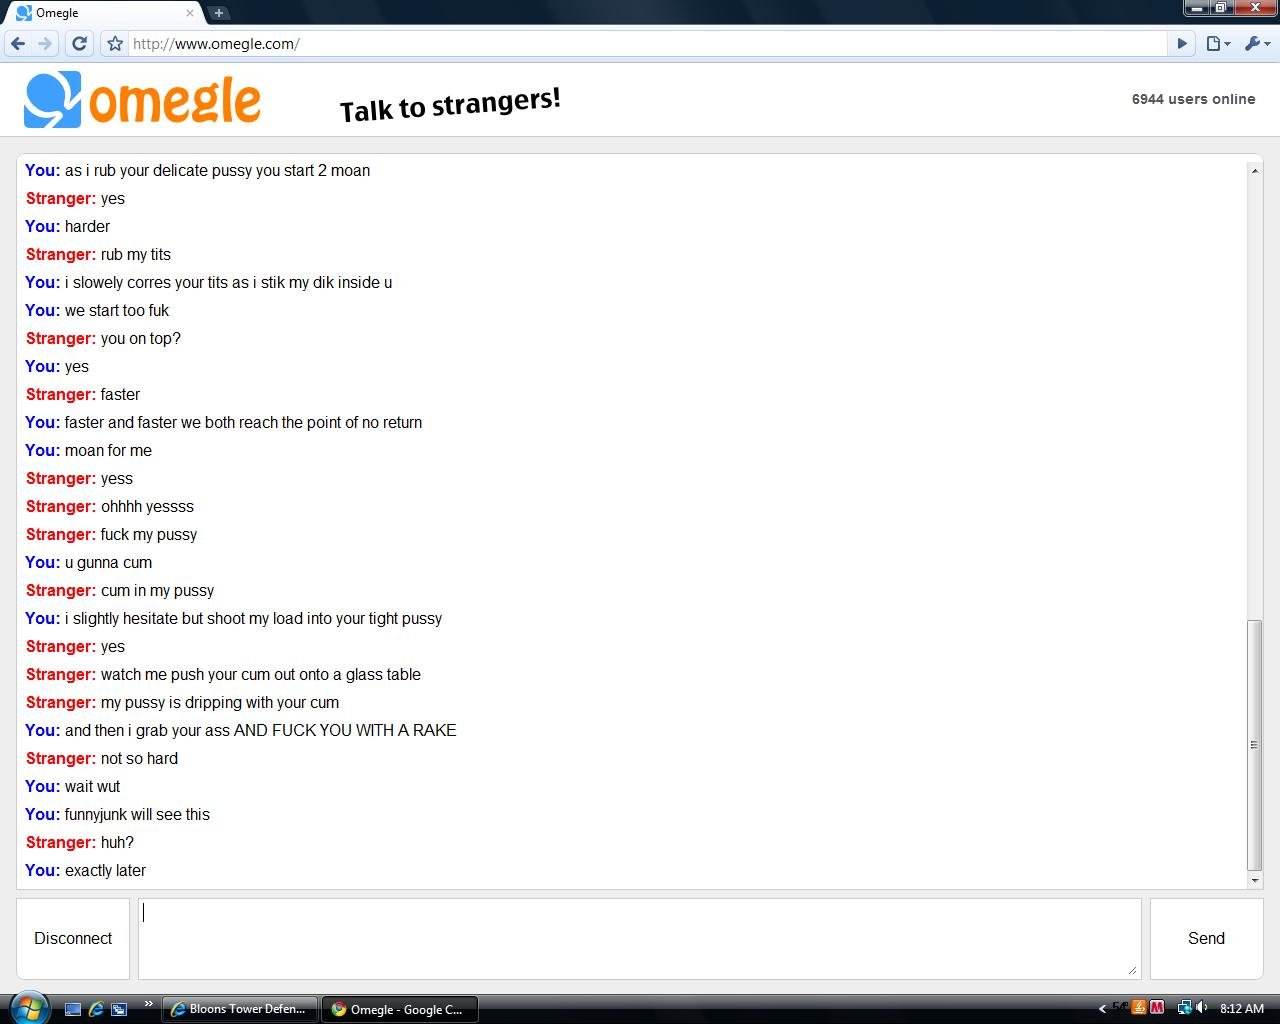 Omegle Chat Sex